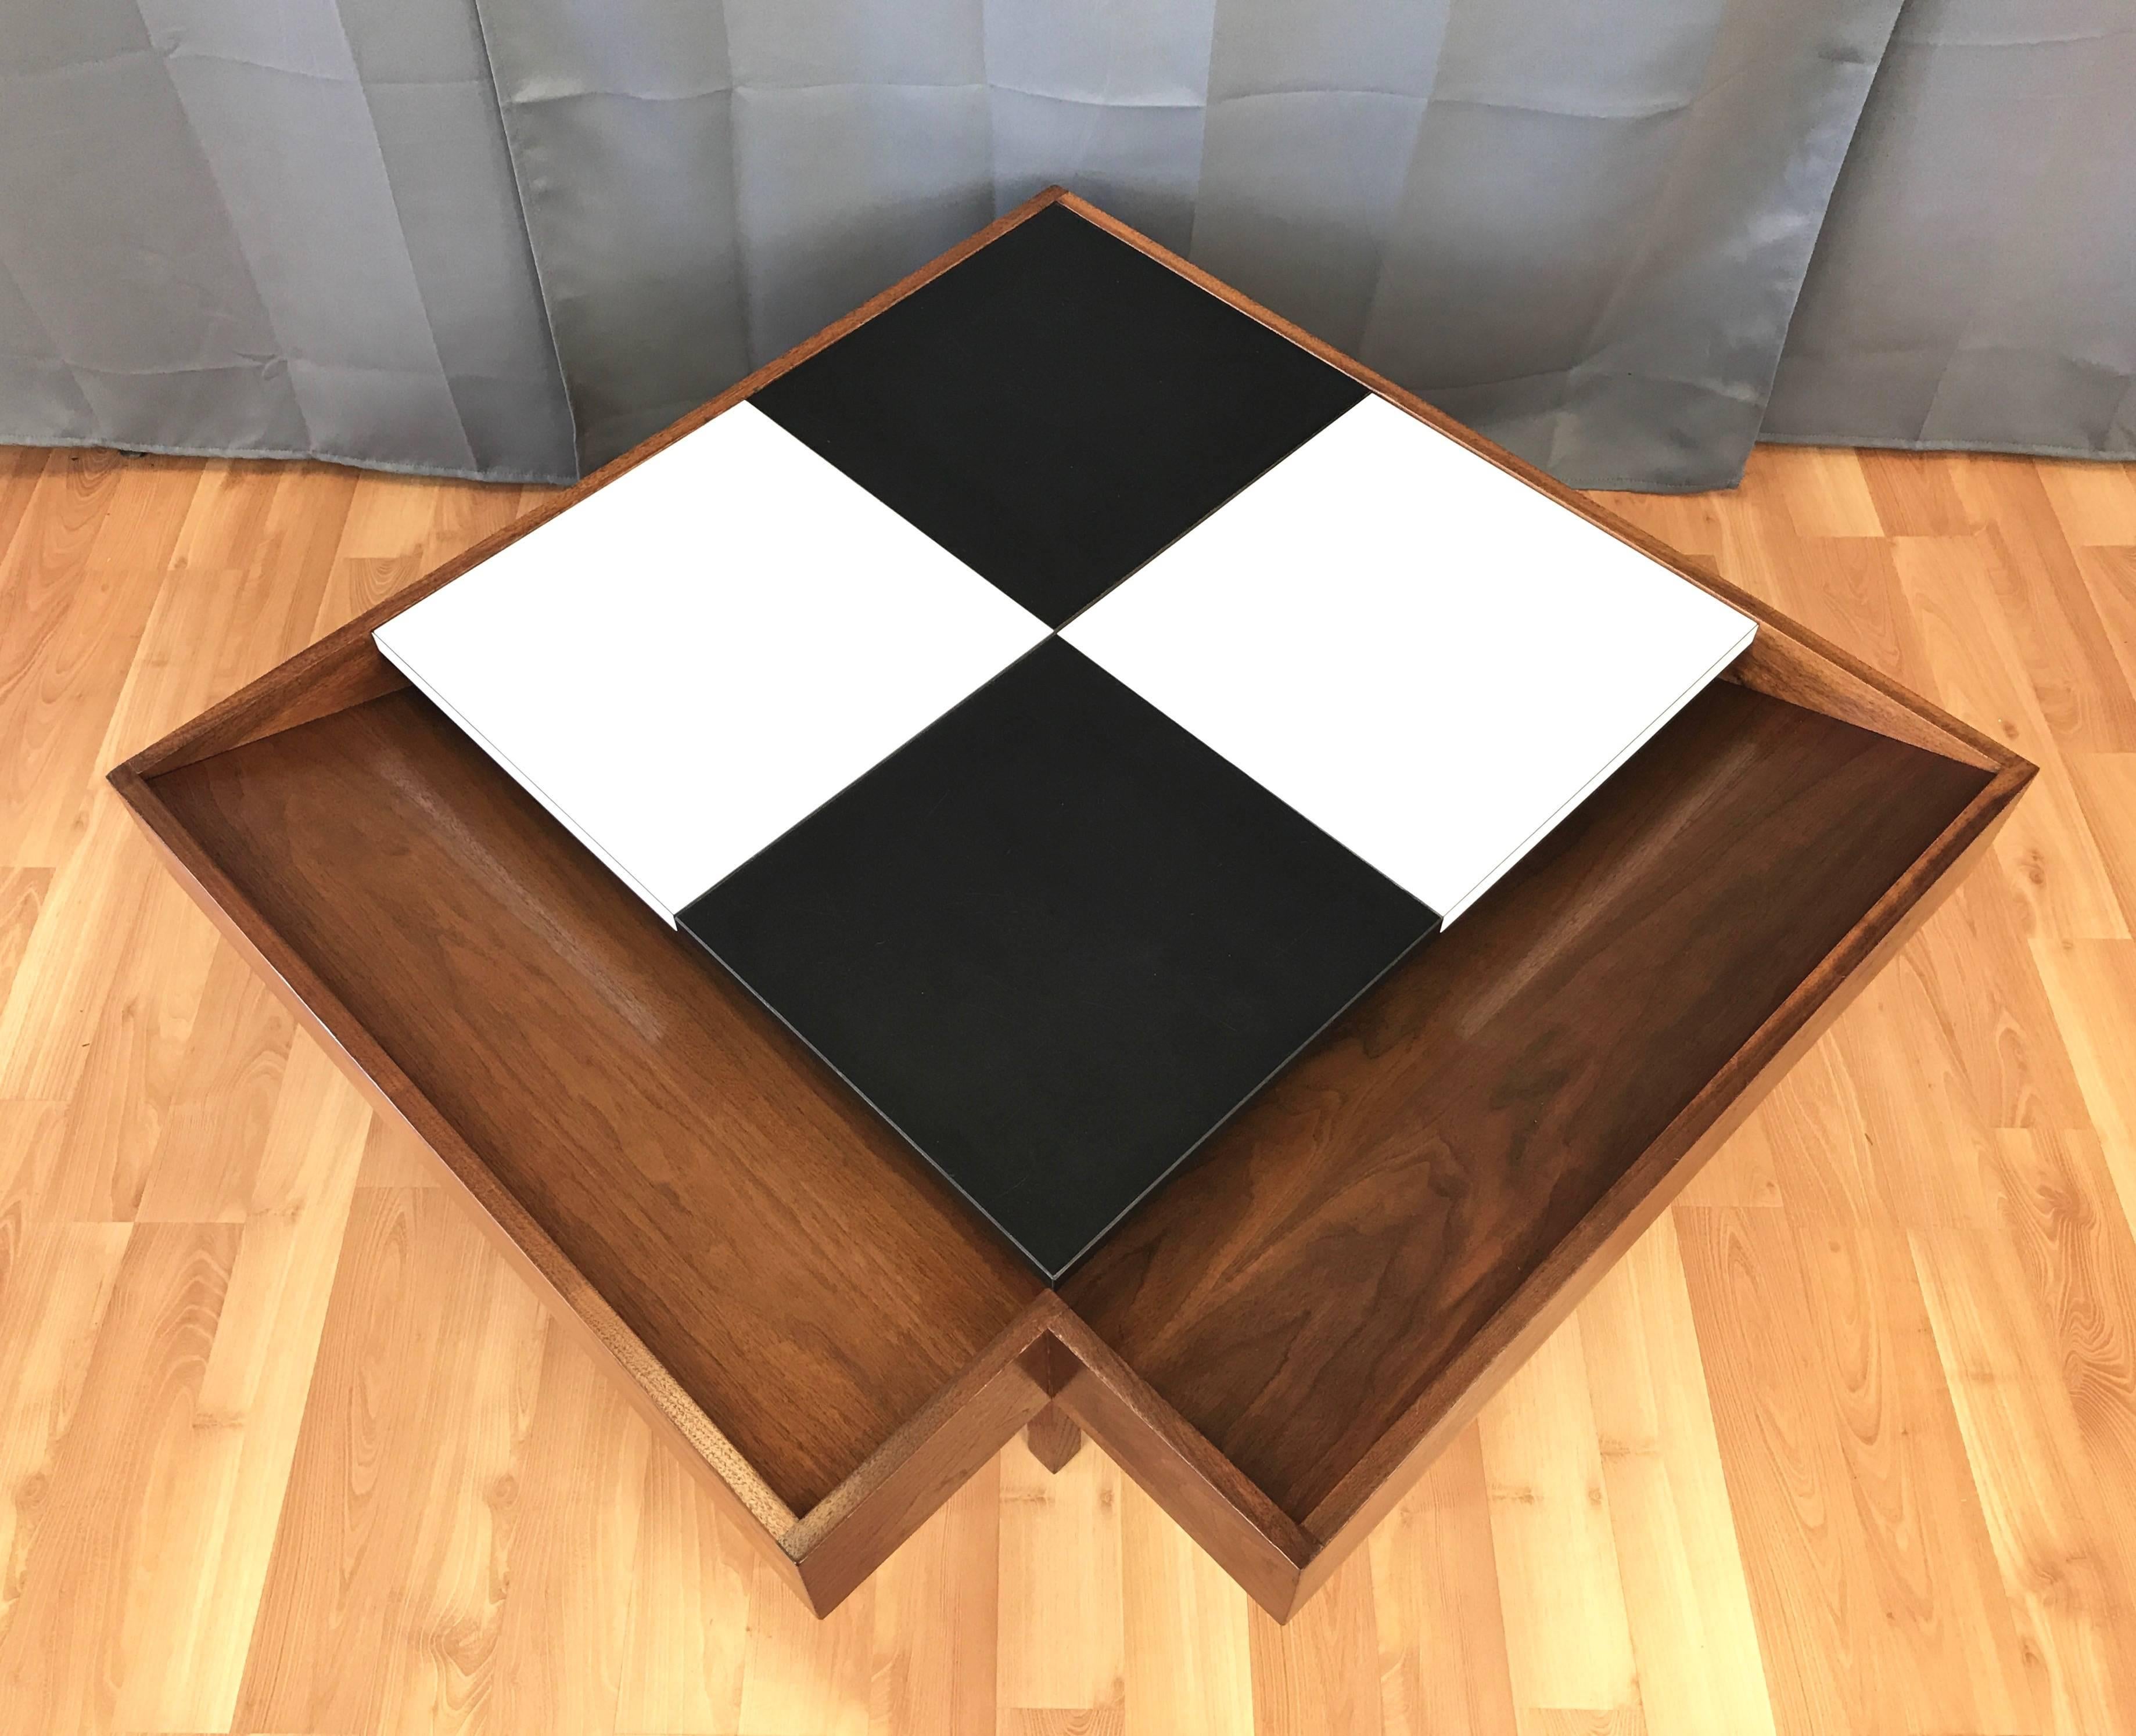 A fantastic Mid-Century Modern walnut coffee table with checkered laminate top by John Keal for Brown-Saltman.

Spacious table has a pair of overhanging bins with angled interiors for the display of magazines and books. Eye-catching original black